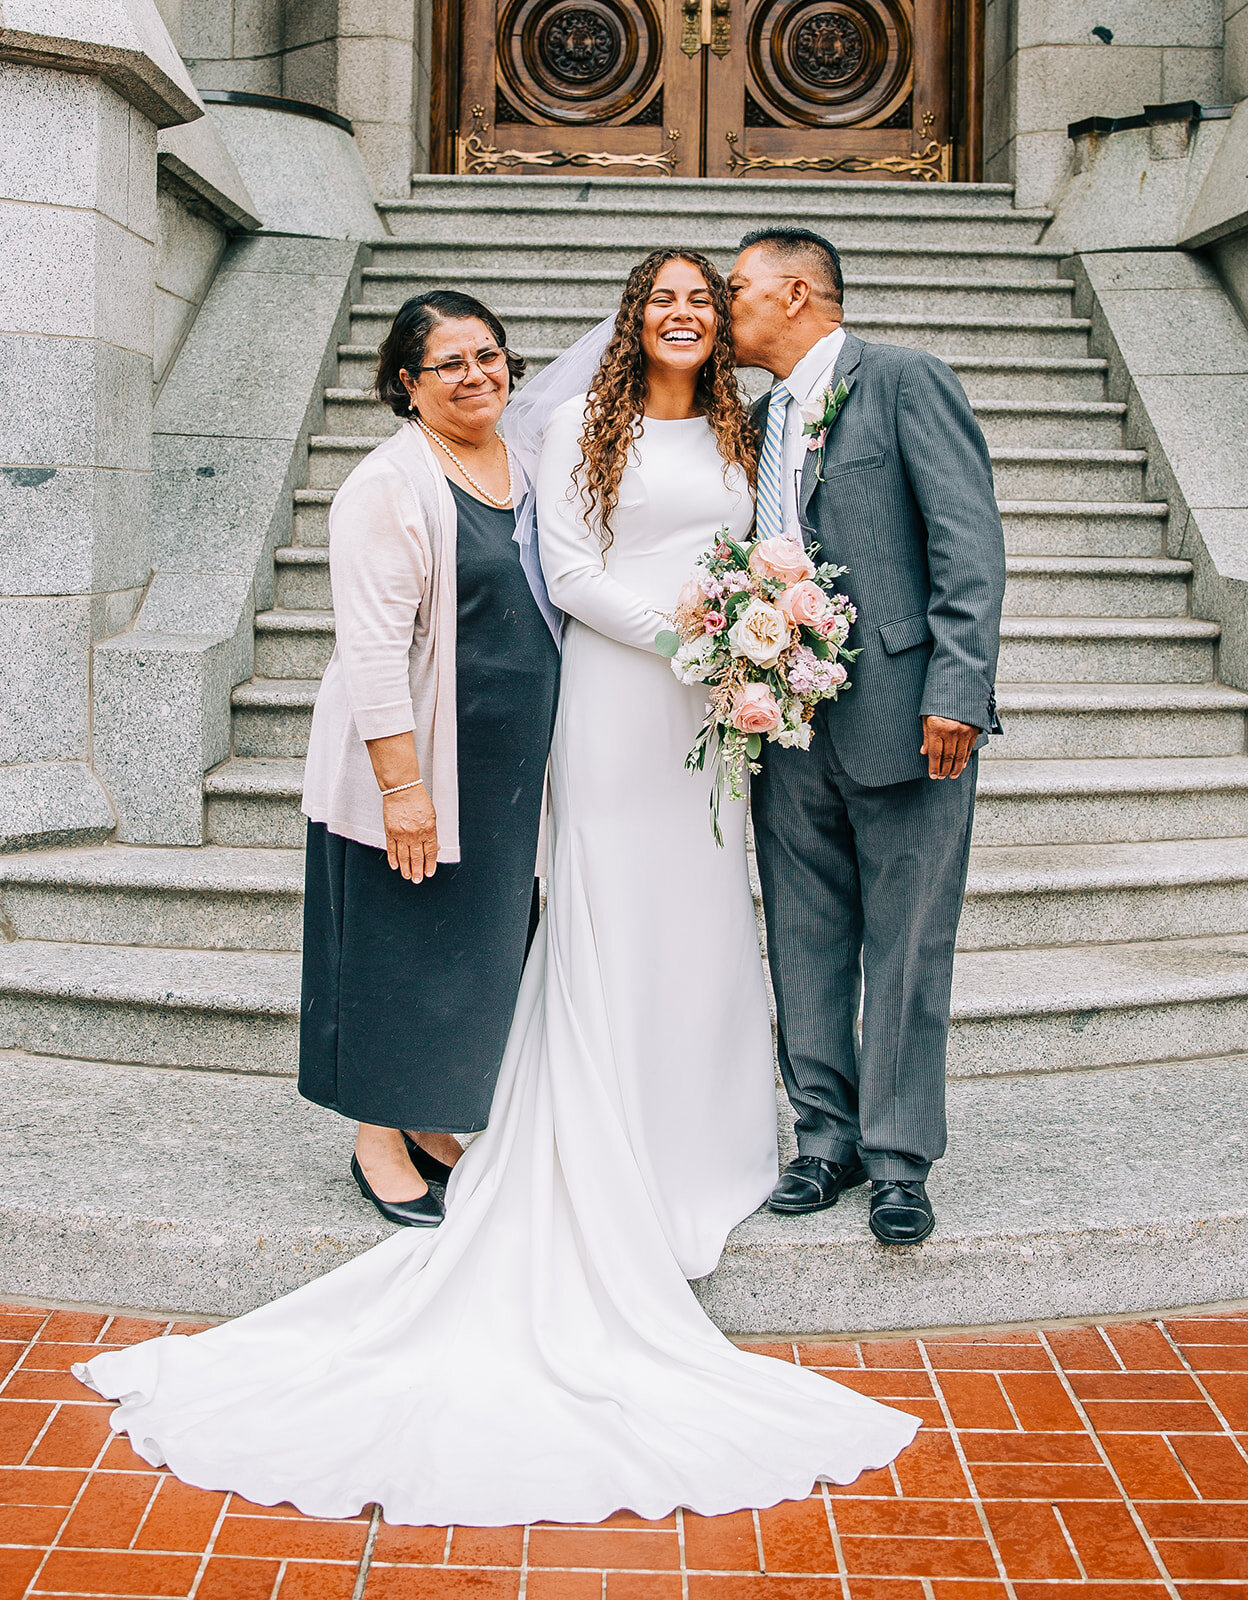  the bride with her parents on her wedding day outside the salt lake city lds temple steps family pictures after temple sealing lds bride professional wedding day photography by bella alder wedding photos you’ll cherish timeless wedding style bridal 